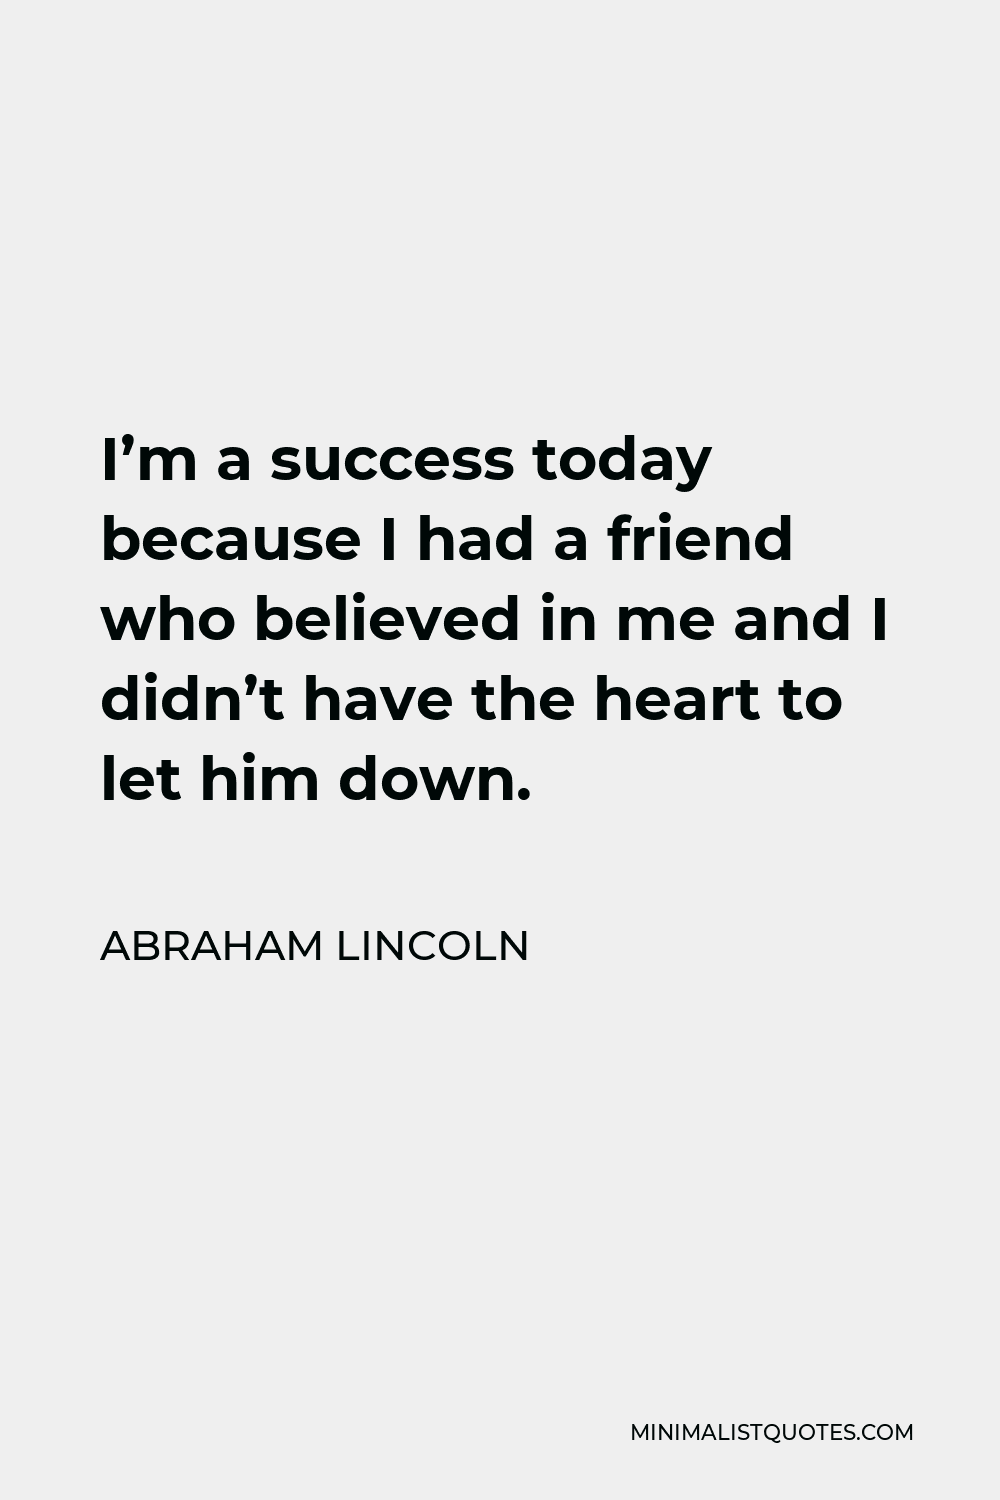 Abraham Lincoln Quote - I’m a success today because I had a friend who believed in me and I didn’t have the heart to let him down.